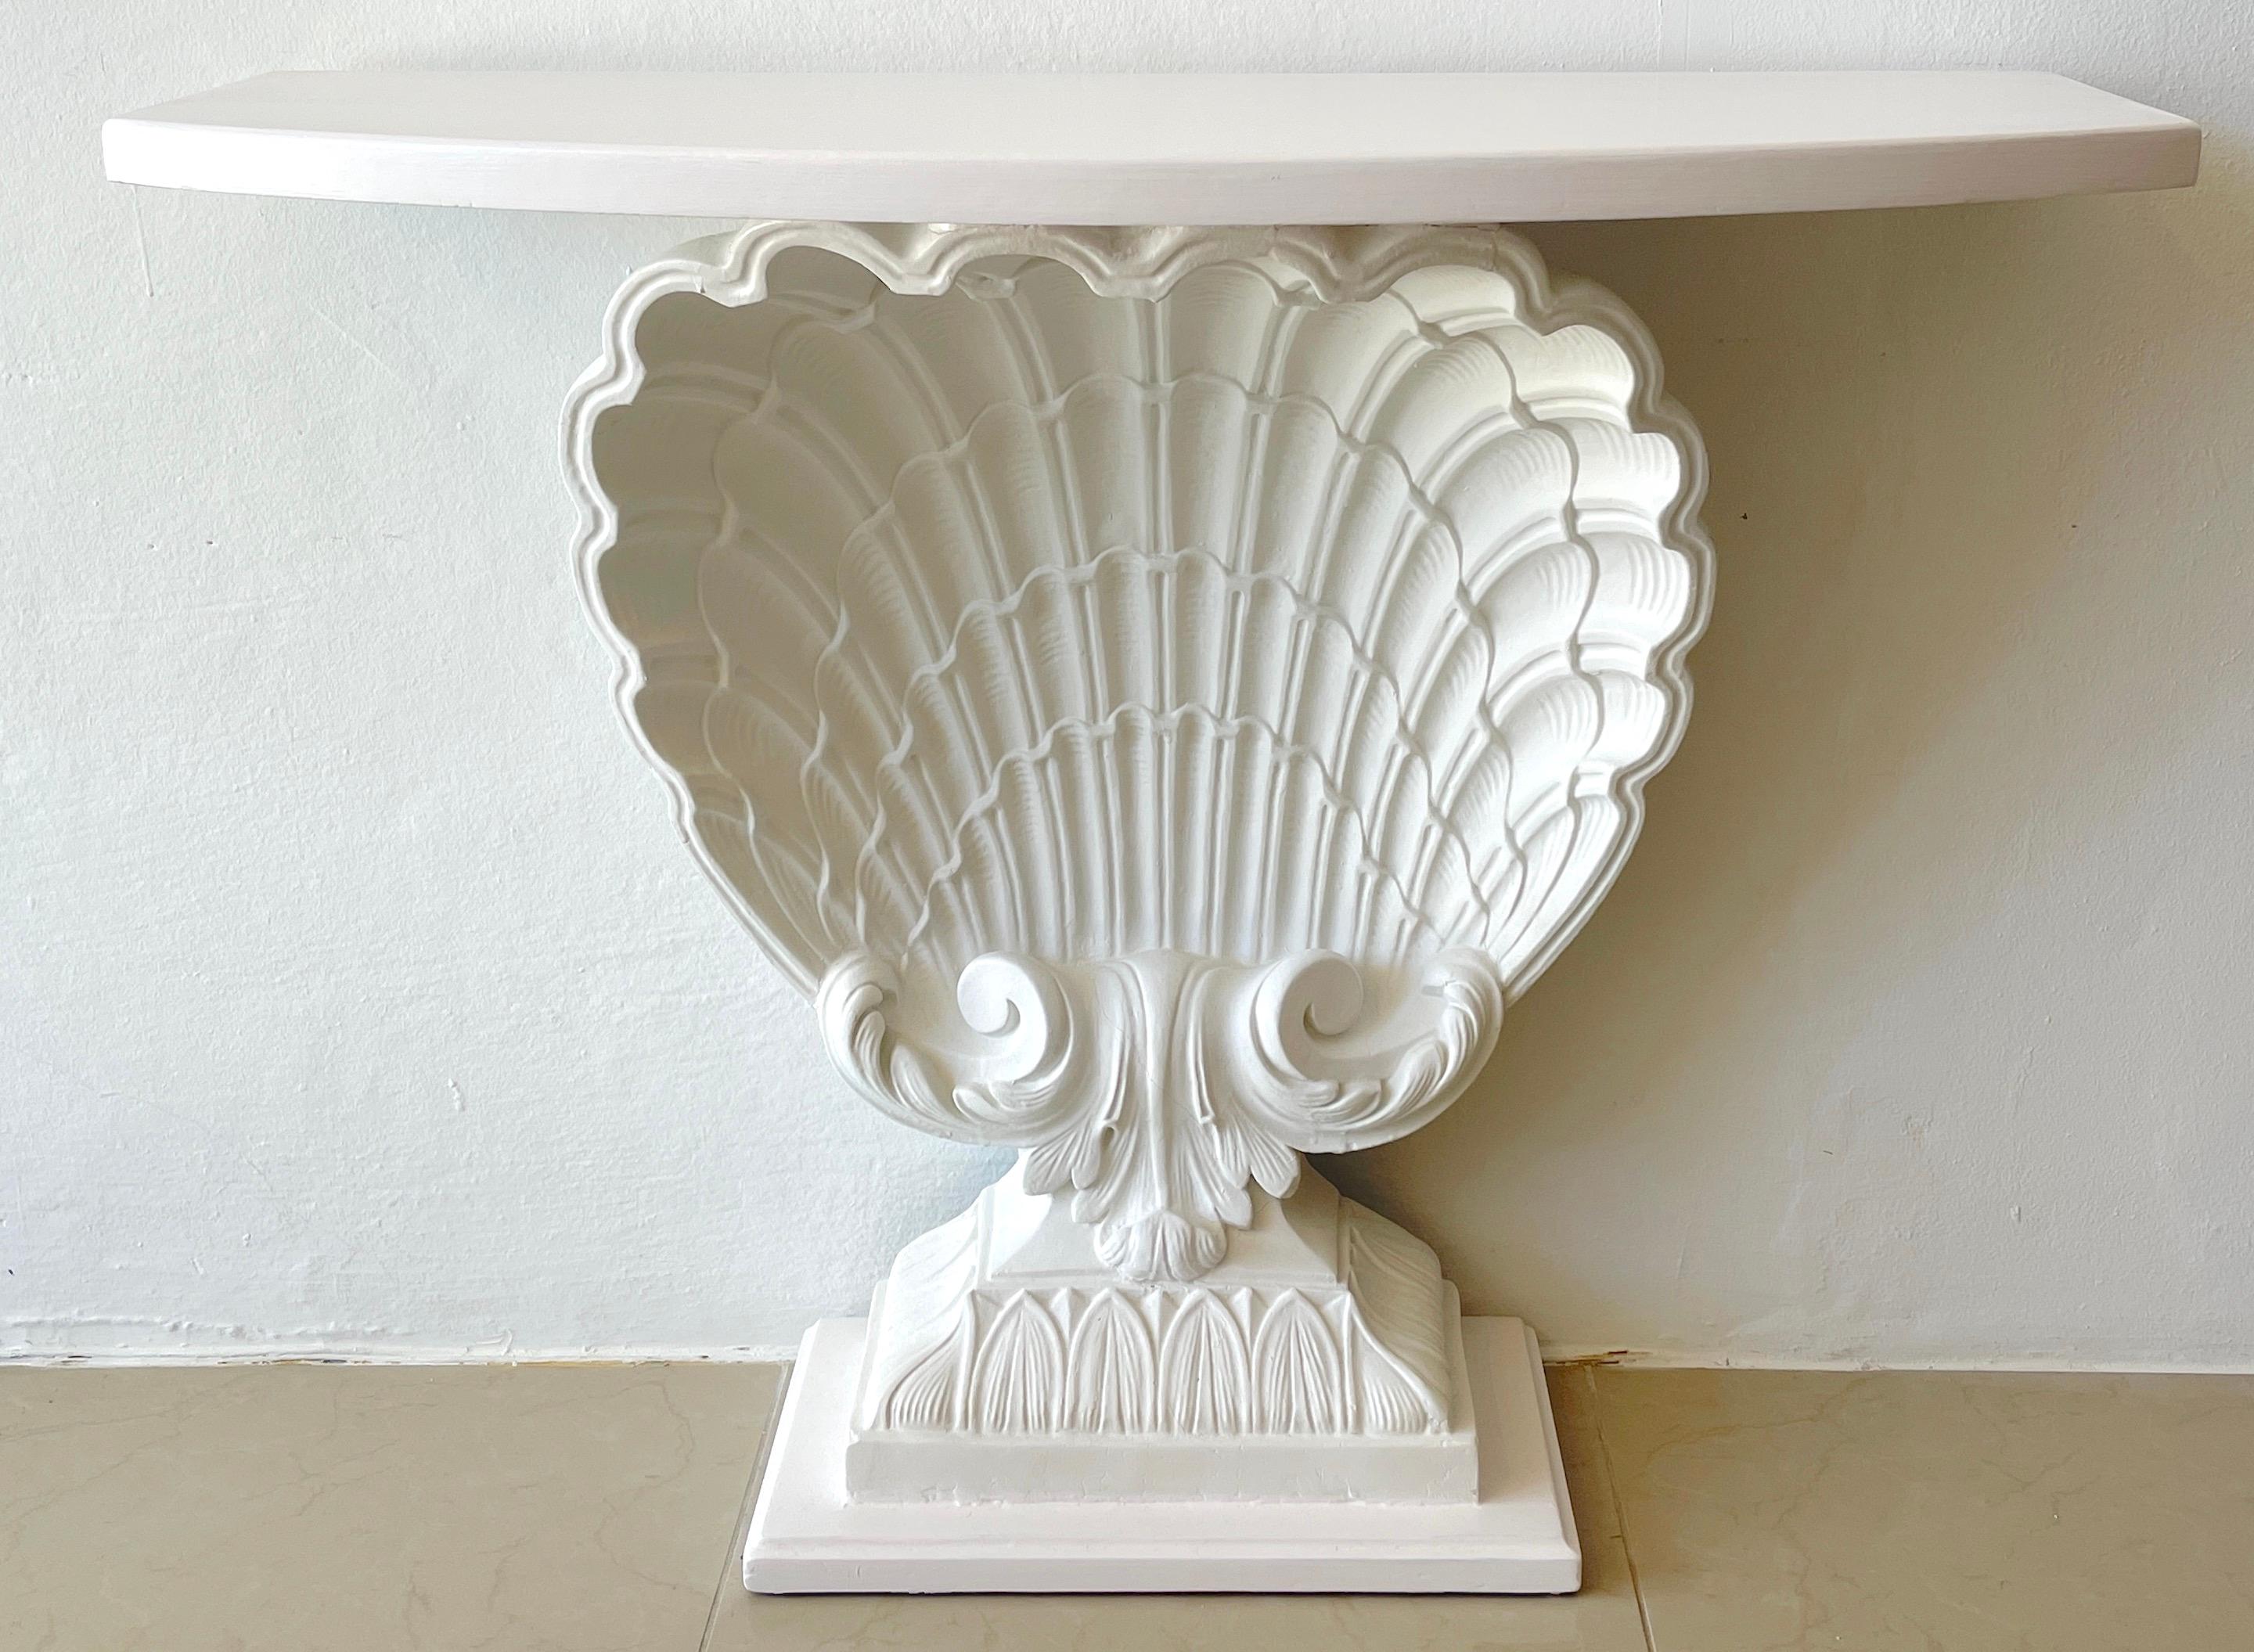 White Lacquered shell console by Grosfeld House, restored
A fine period example with high relief carving, newly lacquered. 
Console measures 38